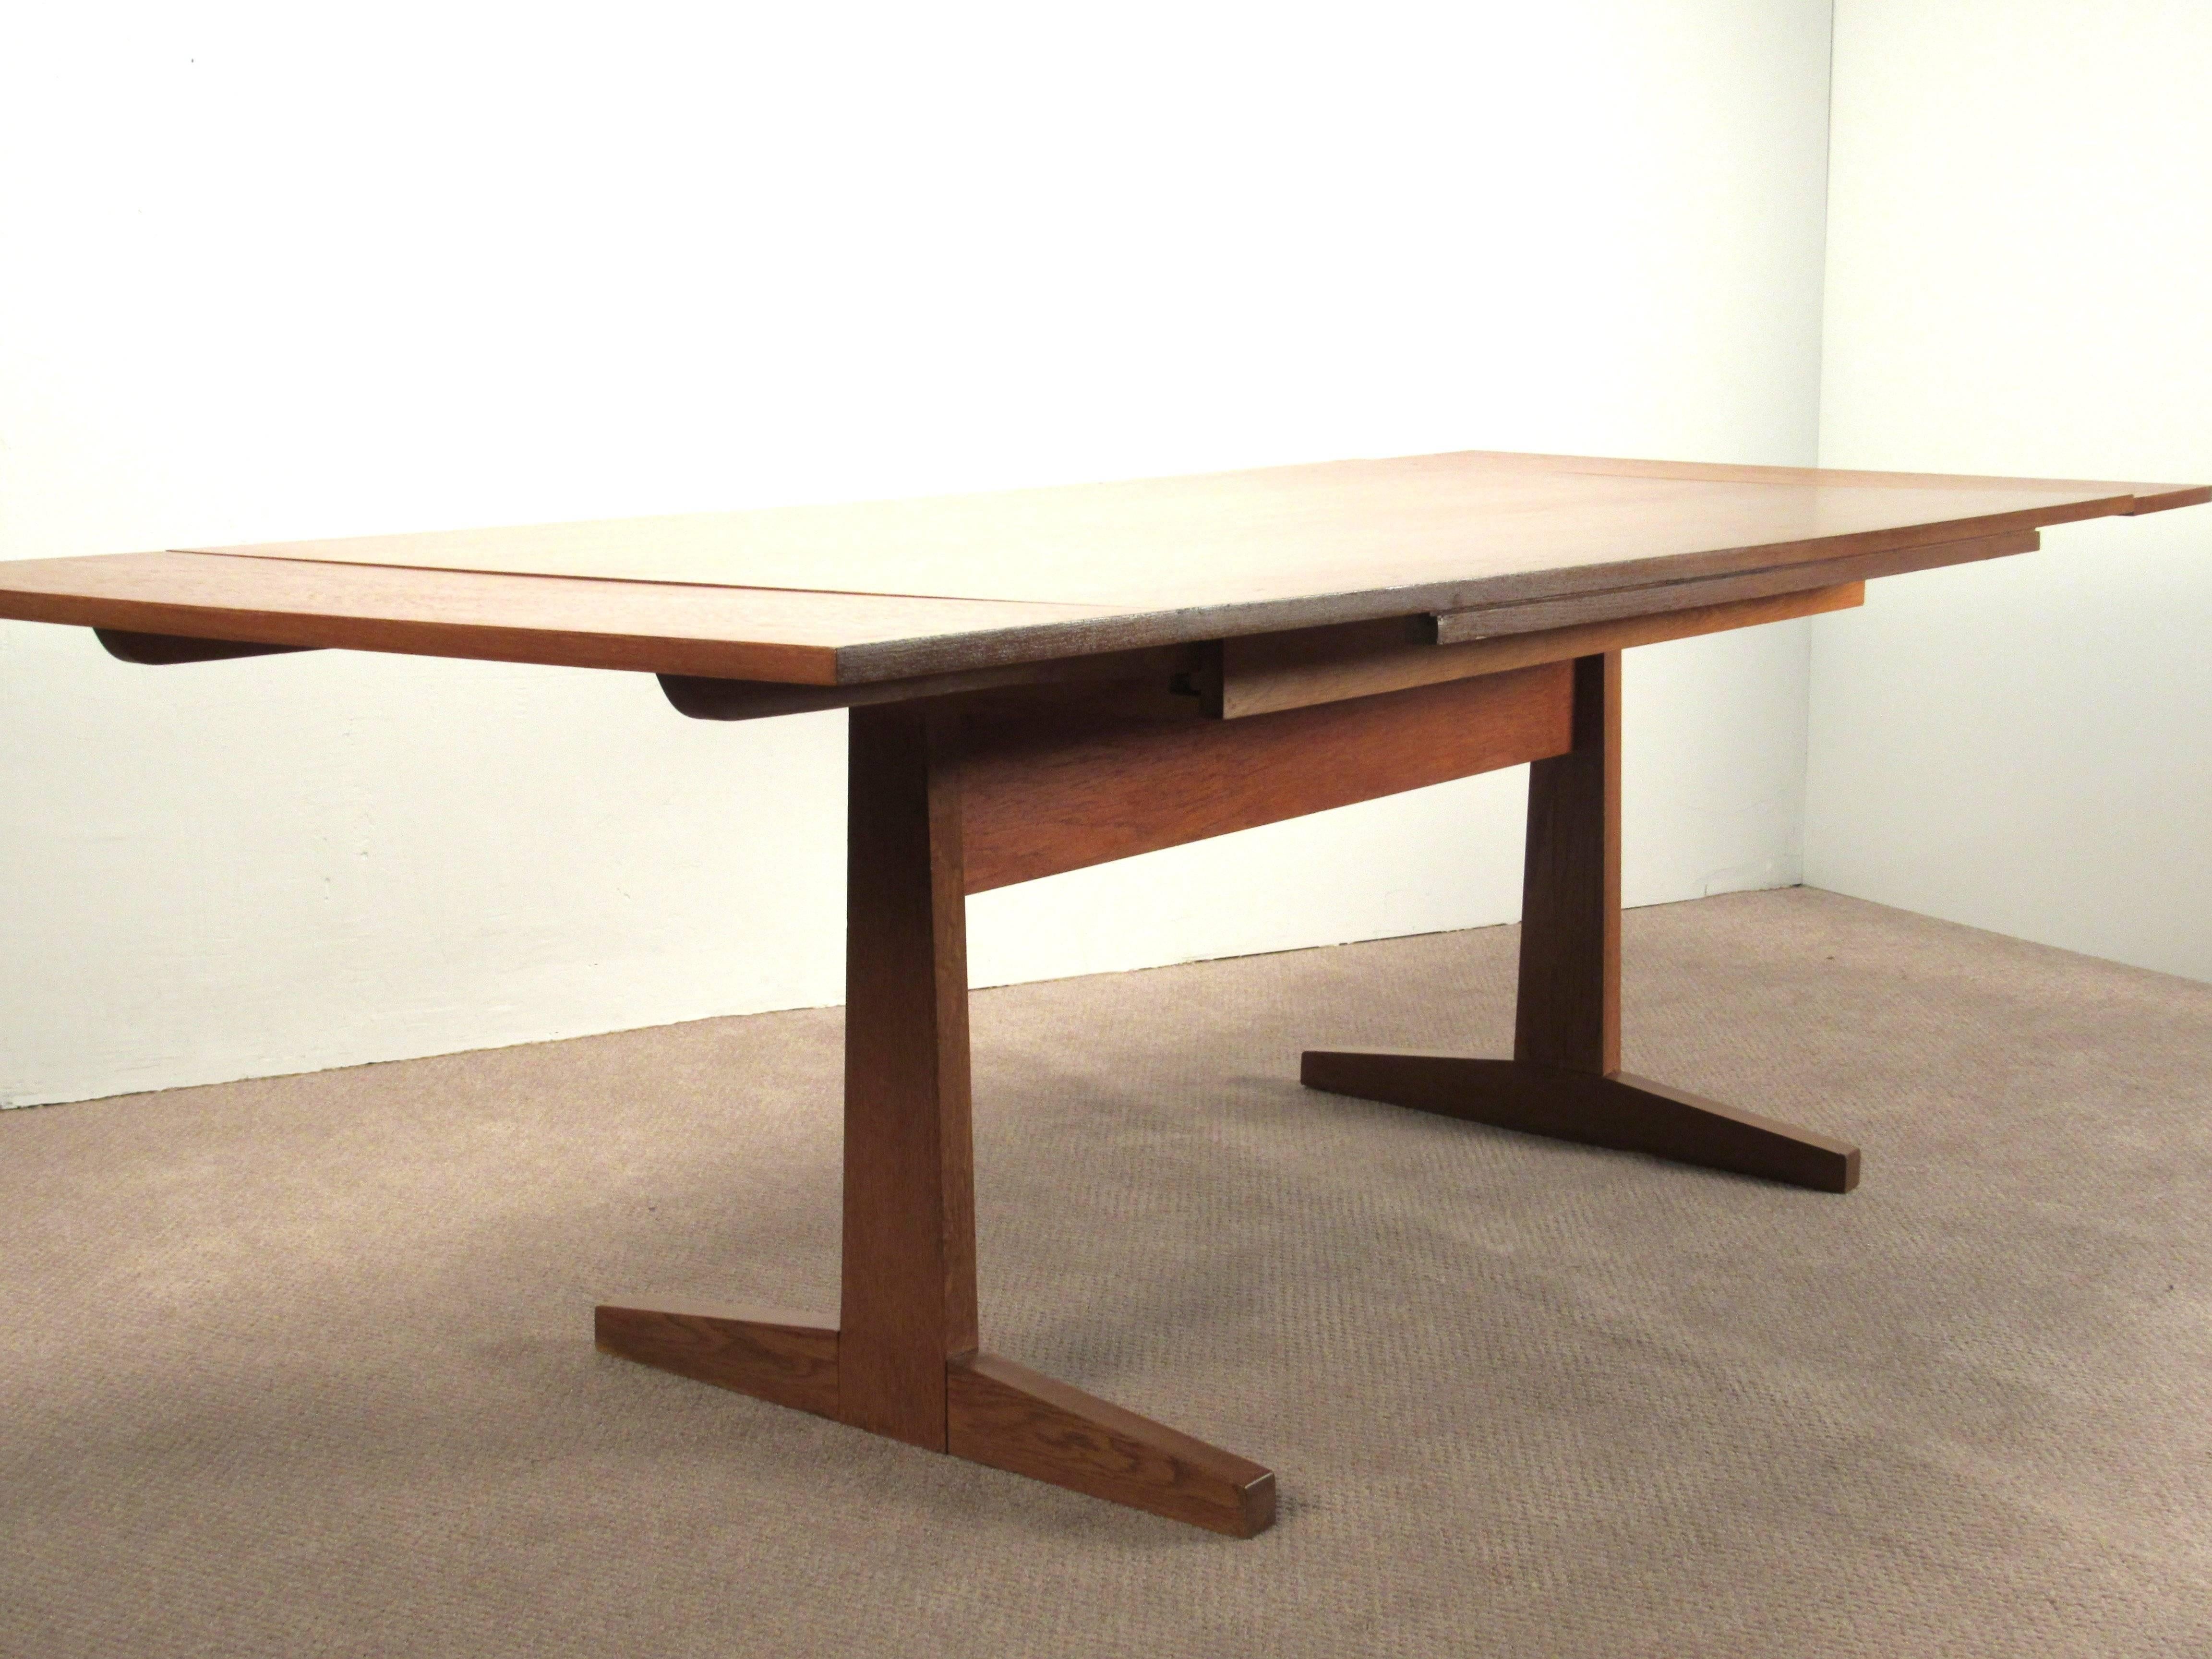 Danish Modern Teak Extending Dining Table with Pedestal Base, 1960s.   Teak Table with leaves that extend from both ends of the table and slide underneath for storage.  
  
Table is 72